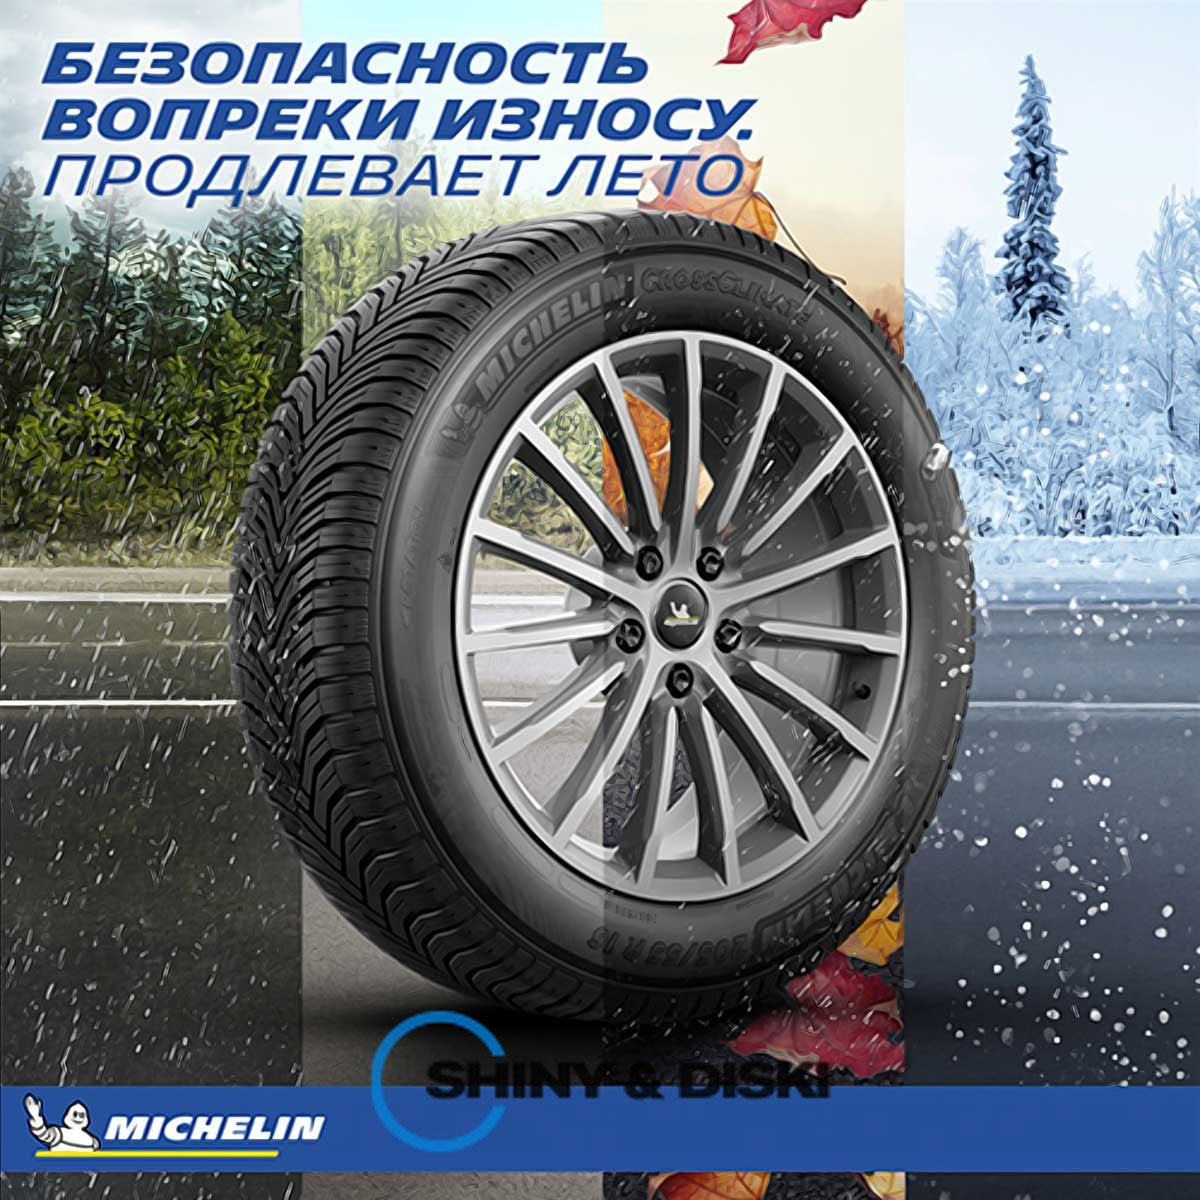 покрышки michelin cross climate+ 225/55 r17 97w